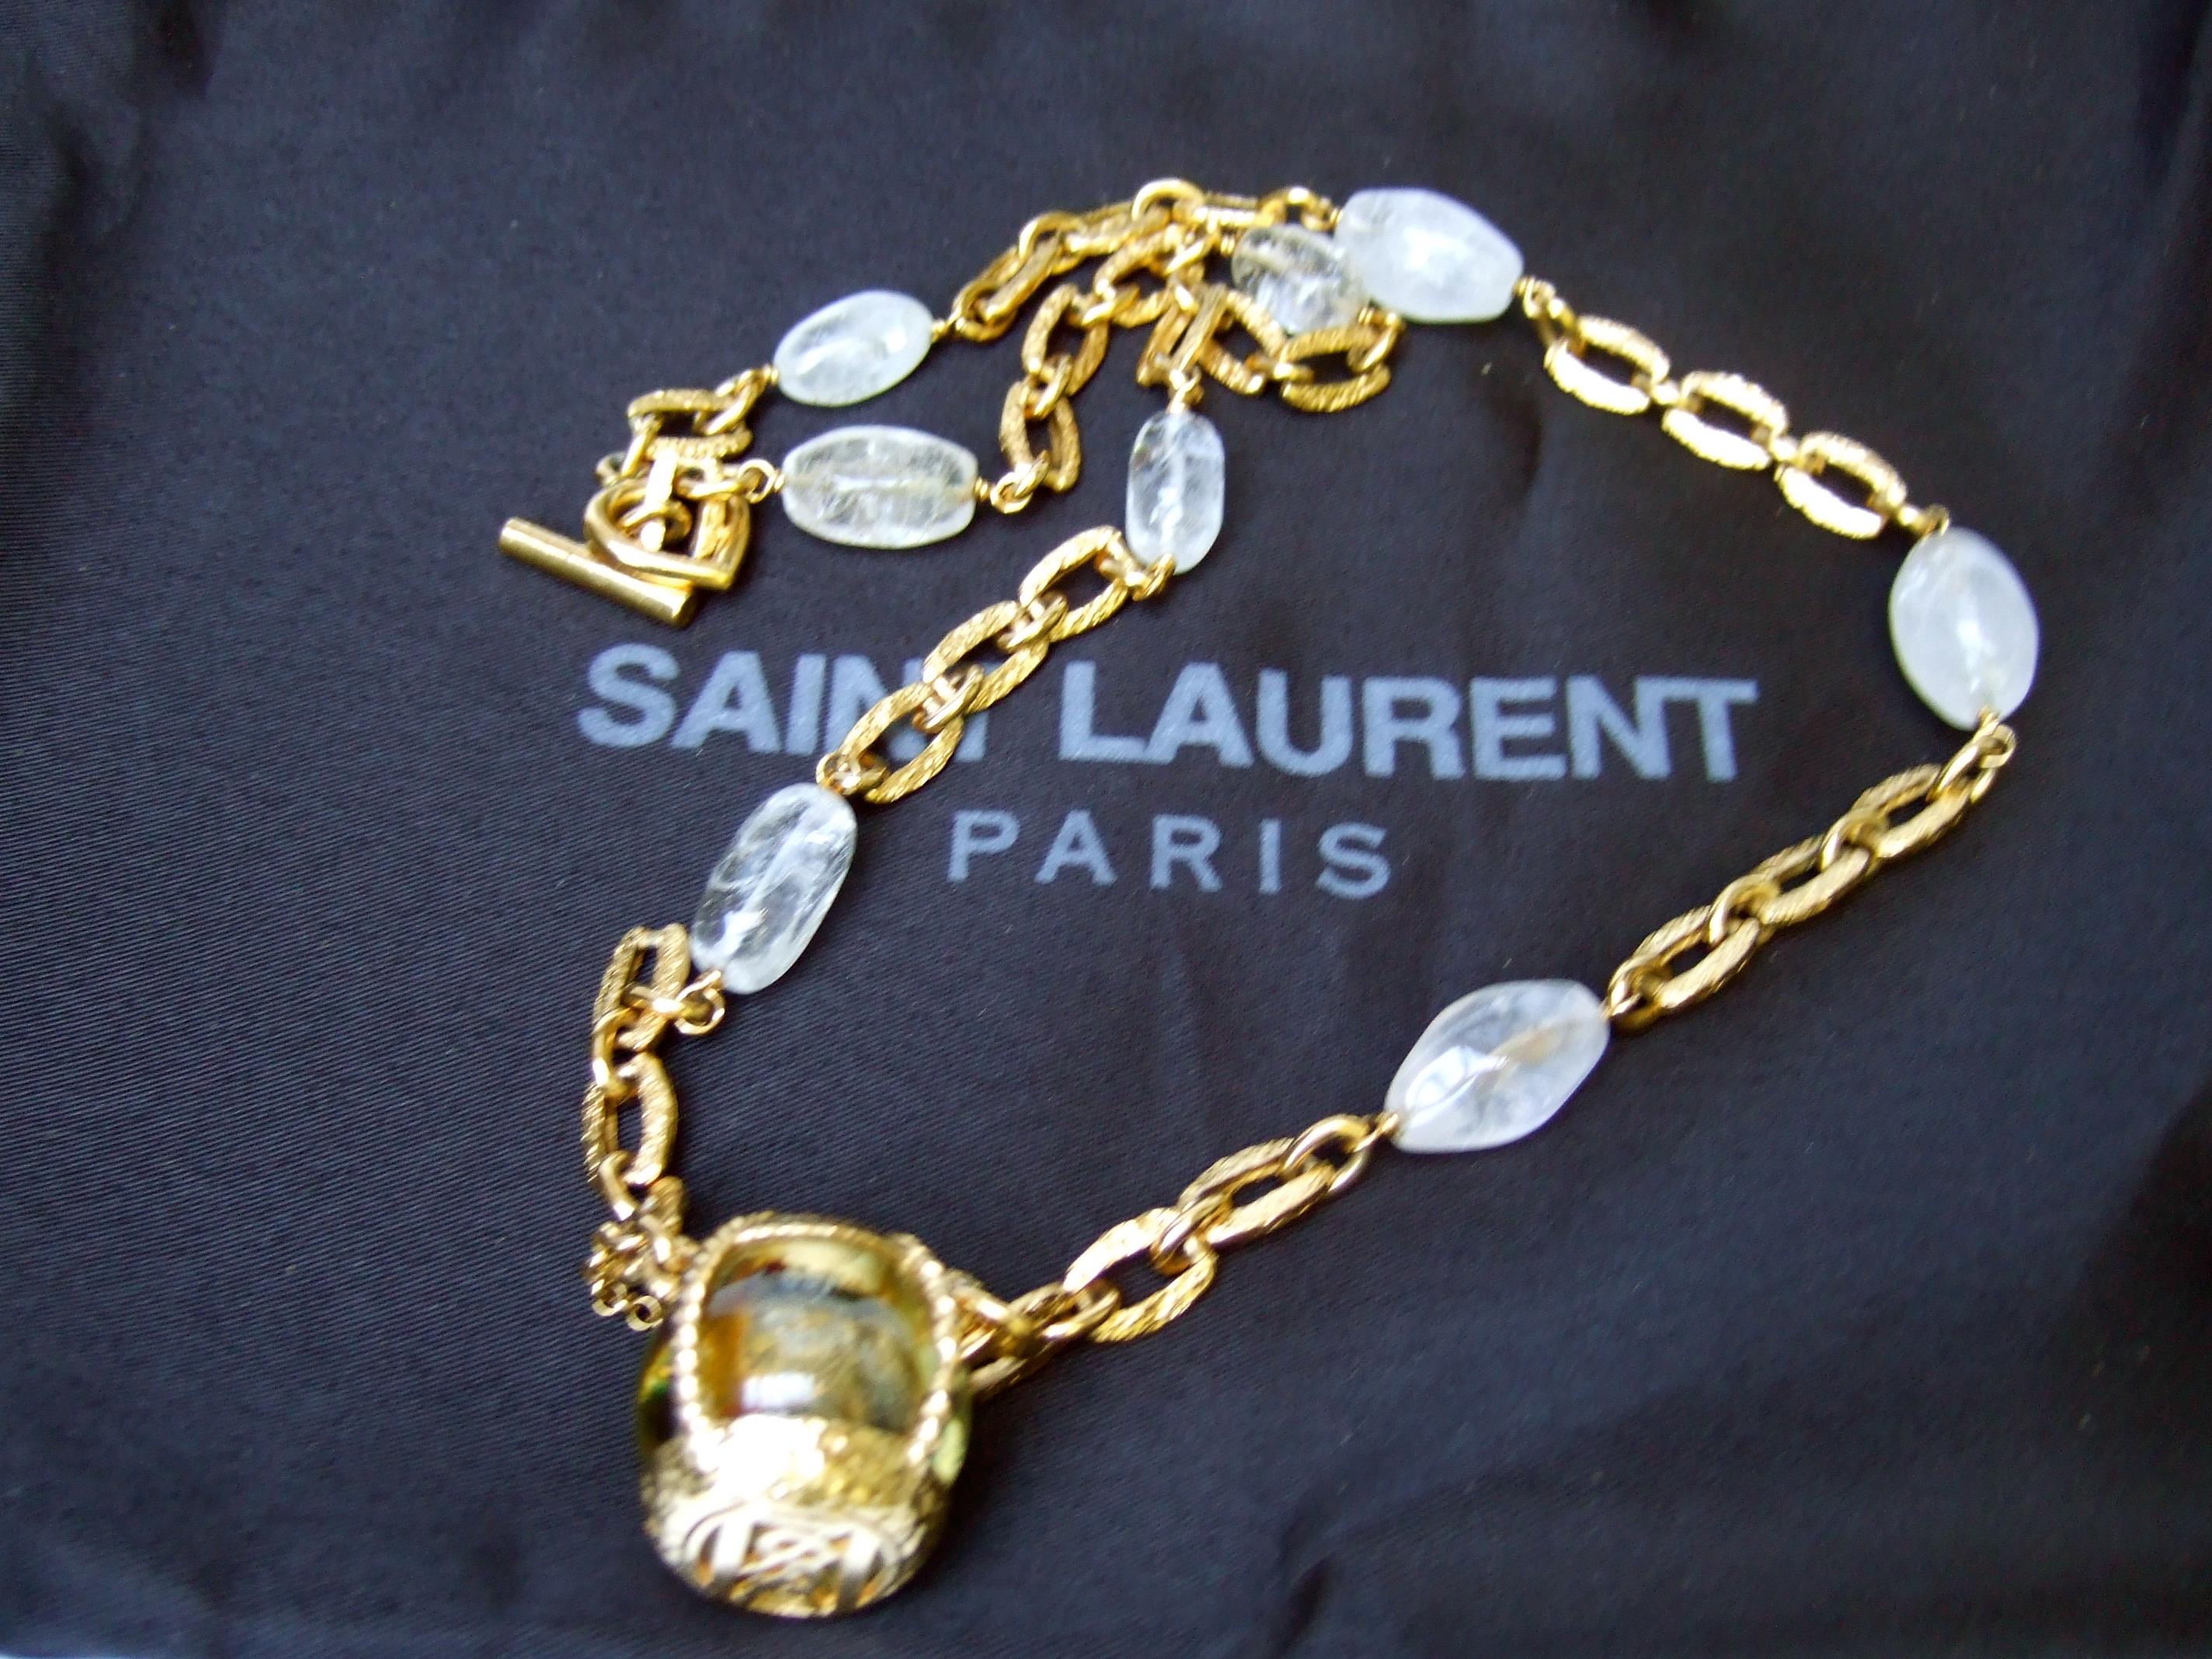 Yves Saint Laurent Rare crystal rock gilt metal chain necklace designed by Robert Goossens 
The chunky hammered link crystal rock chain necklace is designed with a dangling pendant glass orb 
encased in a gilt metal fob that originally contained